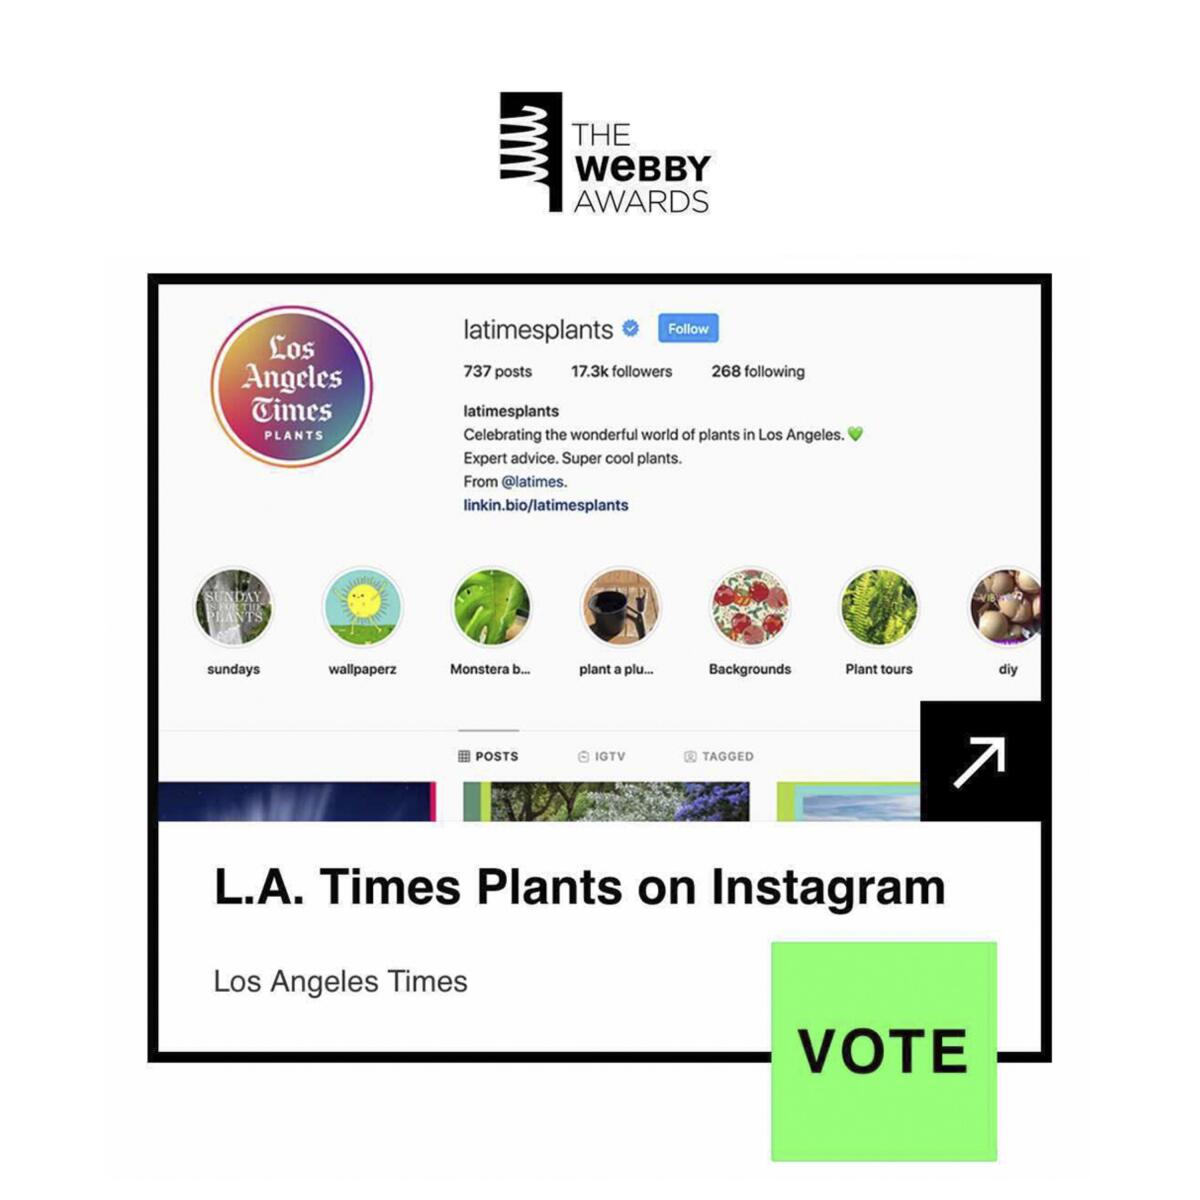 A screenshot of the L.A. Times Plants page on Instagram